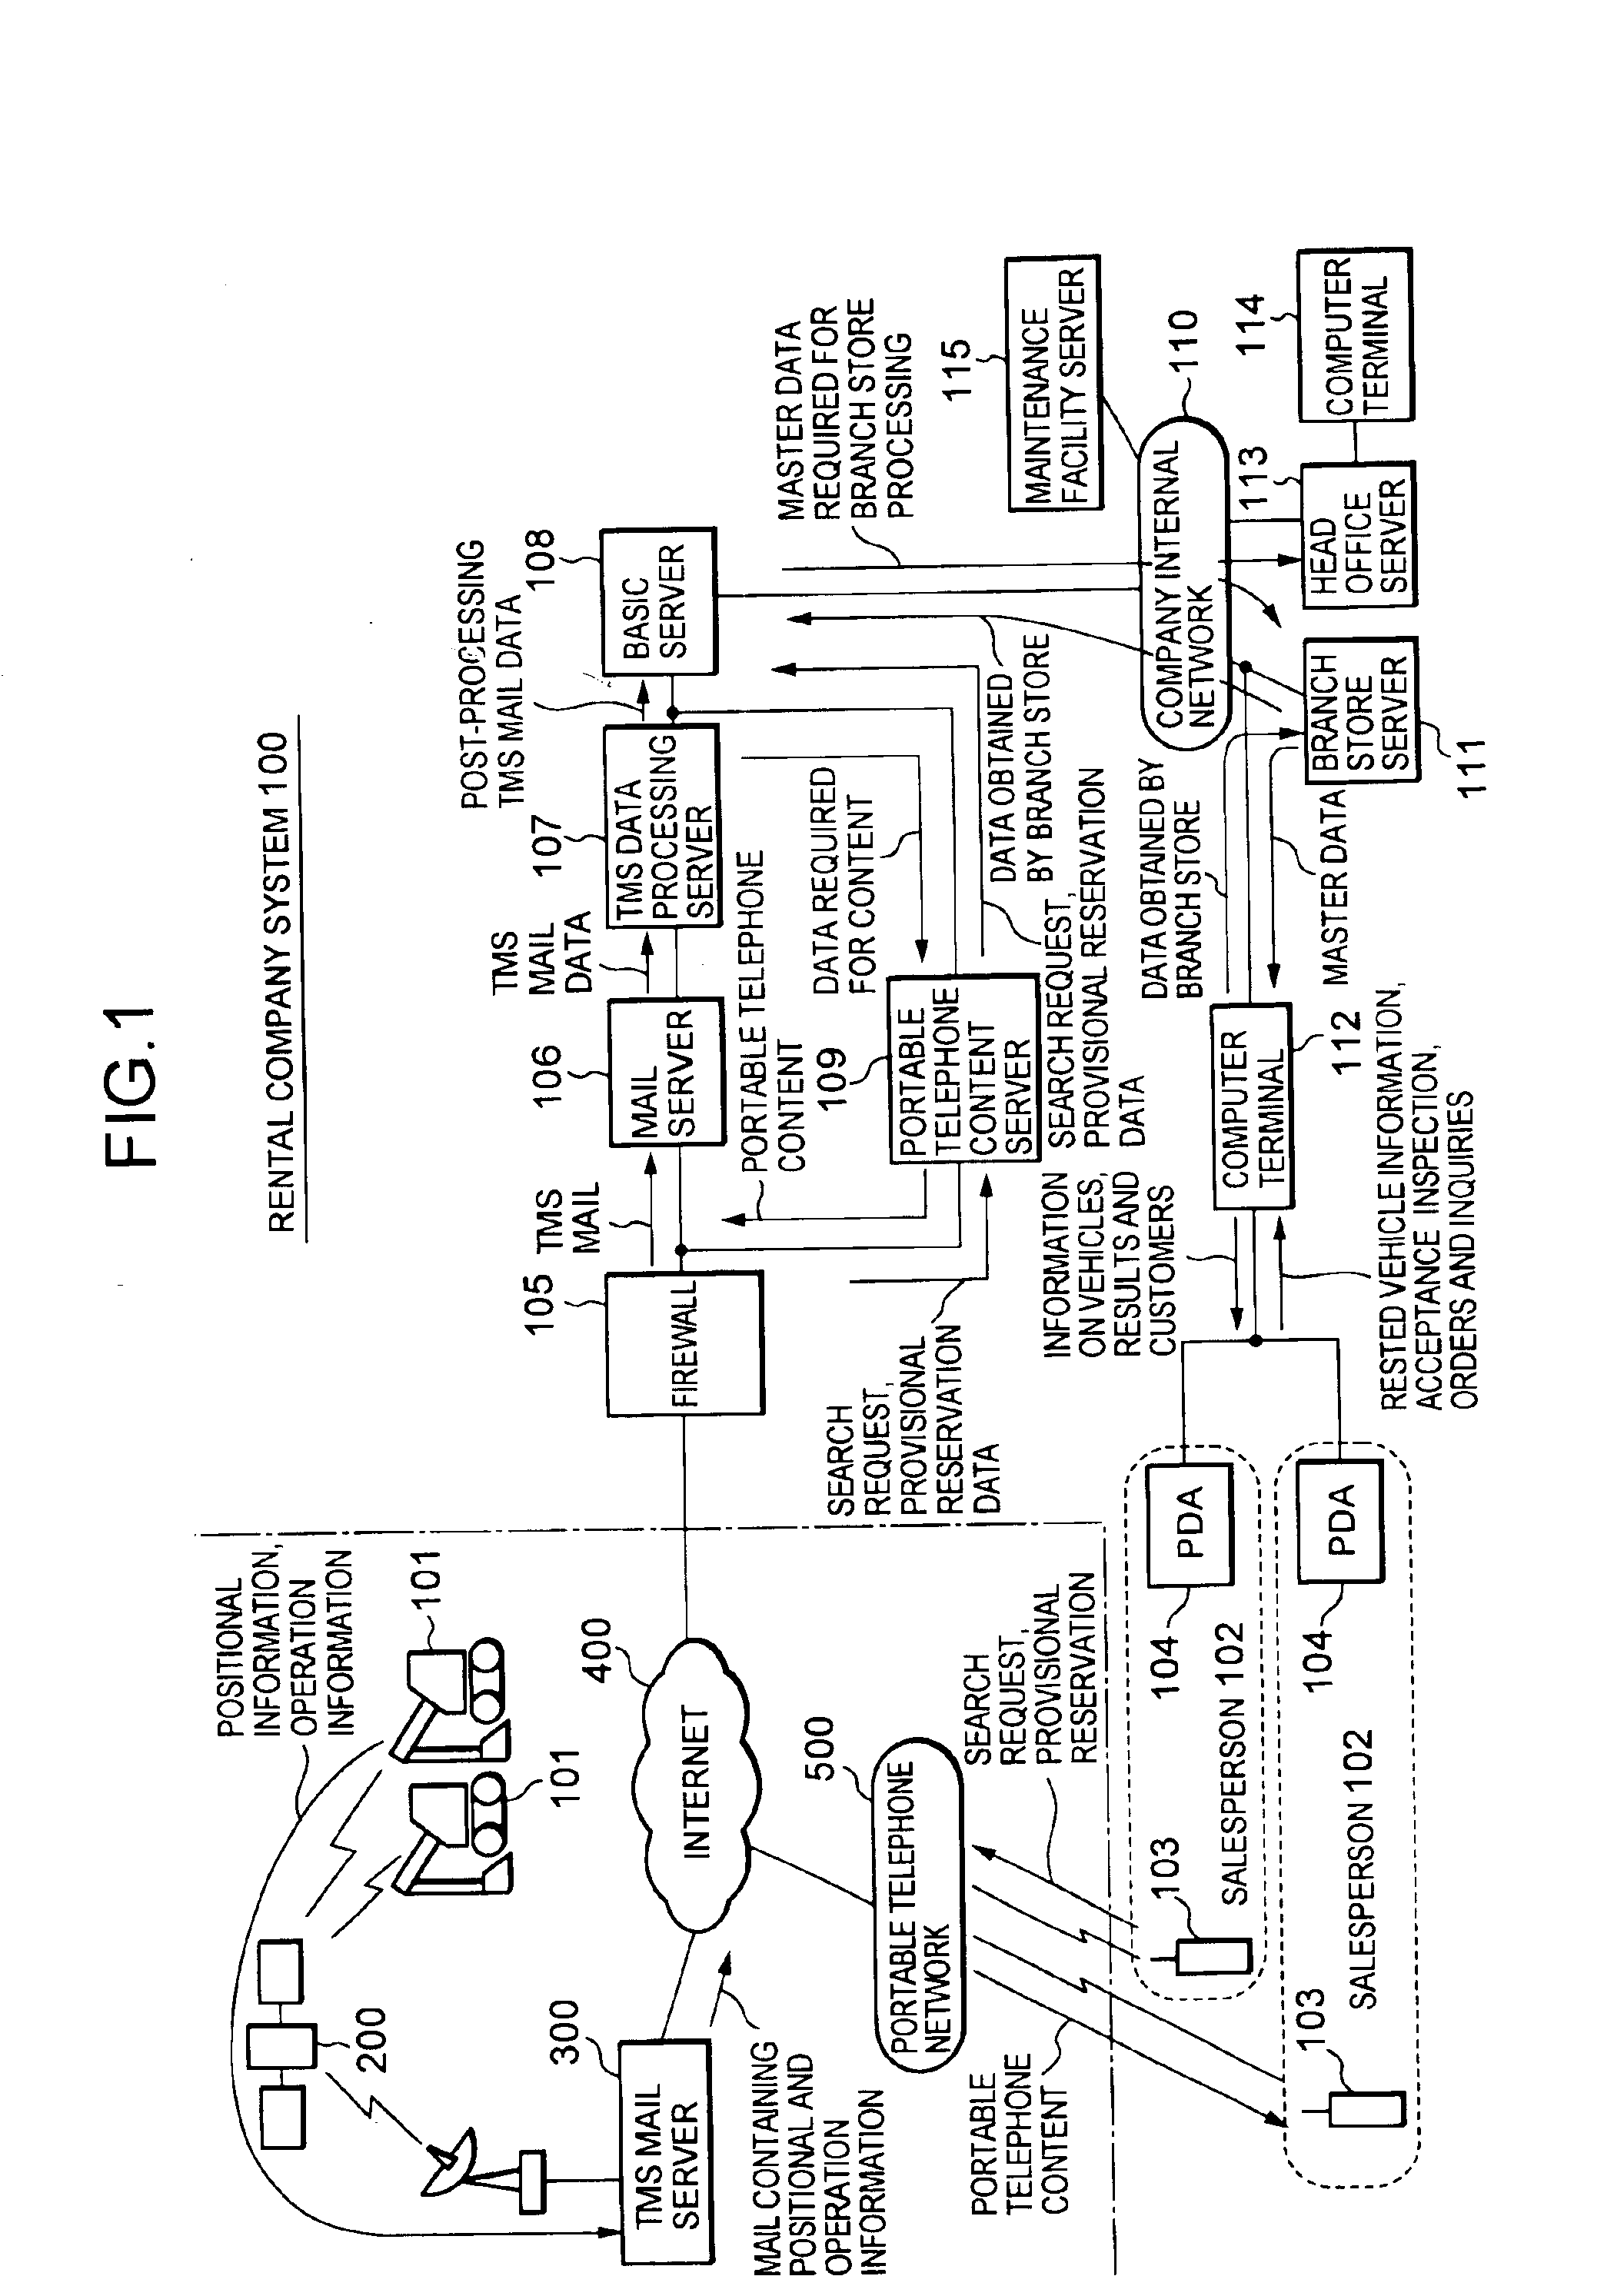 System and method for monitoring remotely located objects